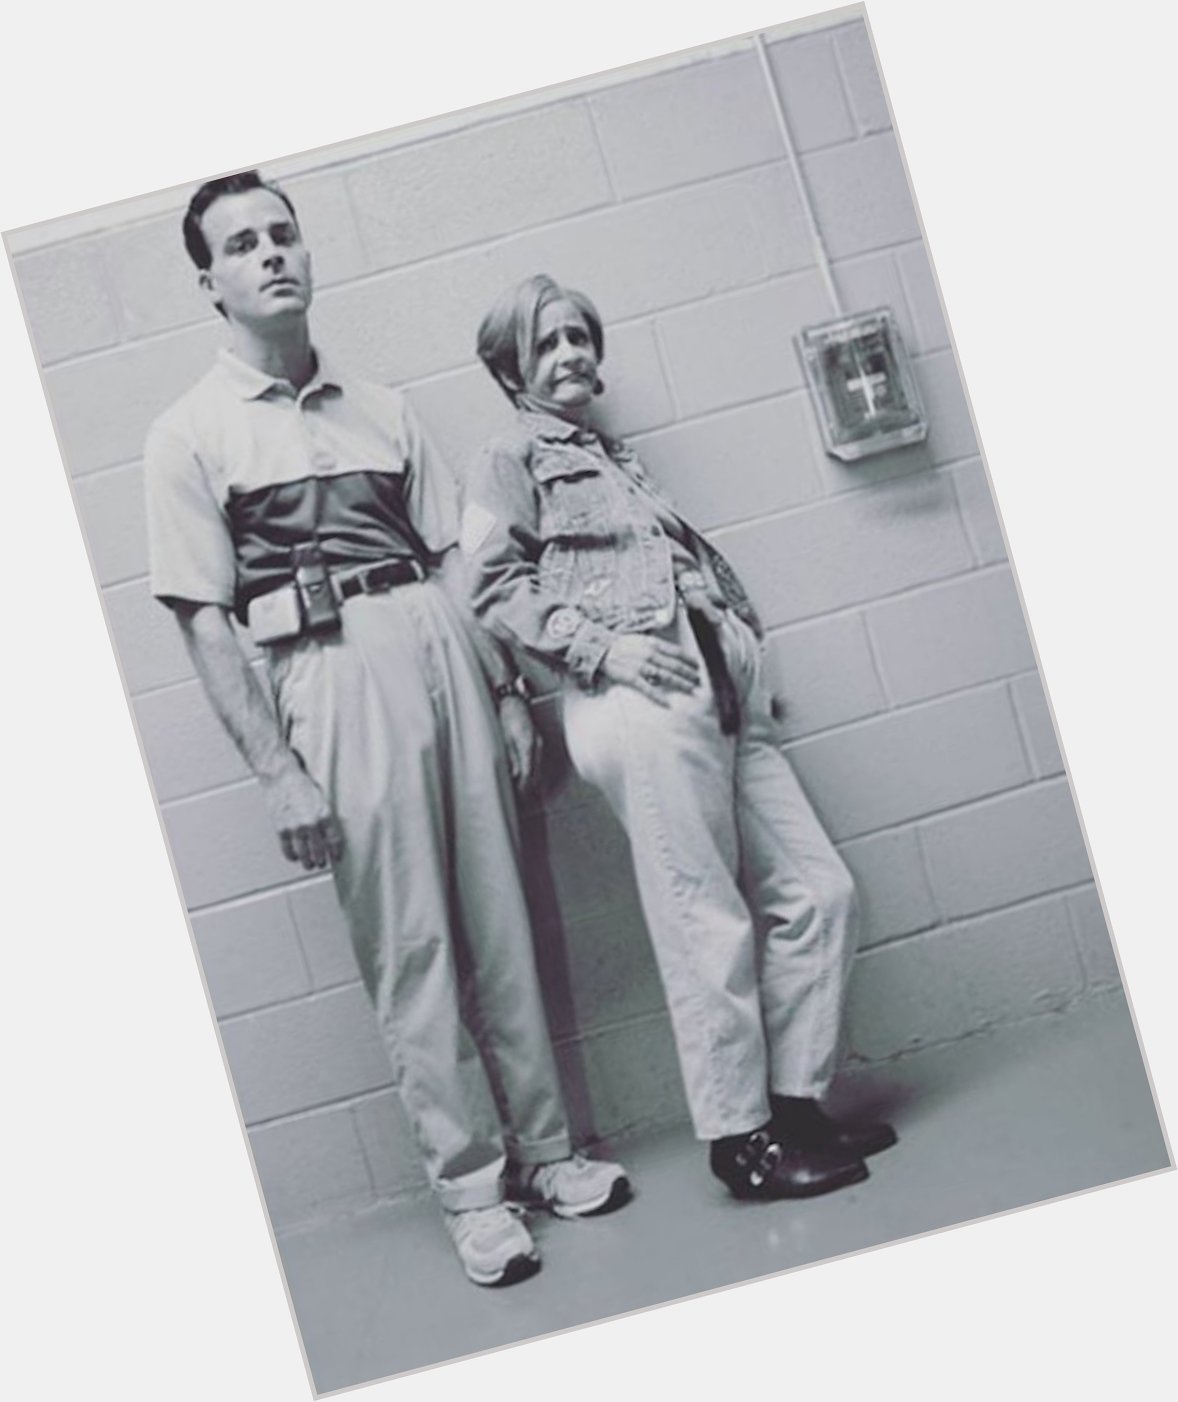 Amy Sedaris wishing Justin Theroux a happy birthday with this photo equals massive friend goals 